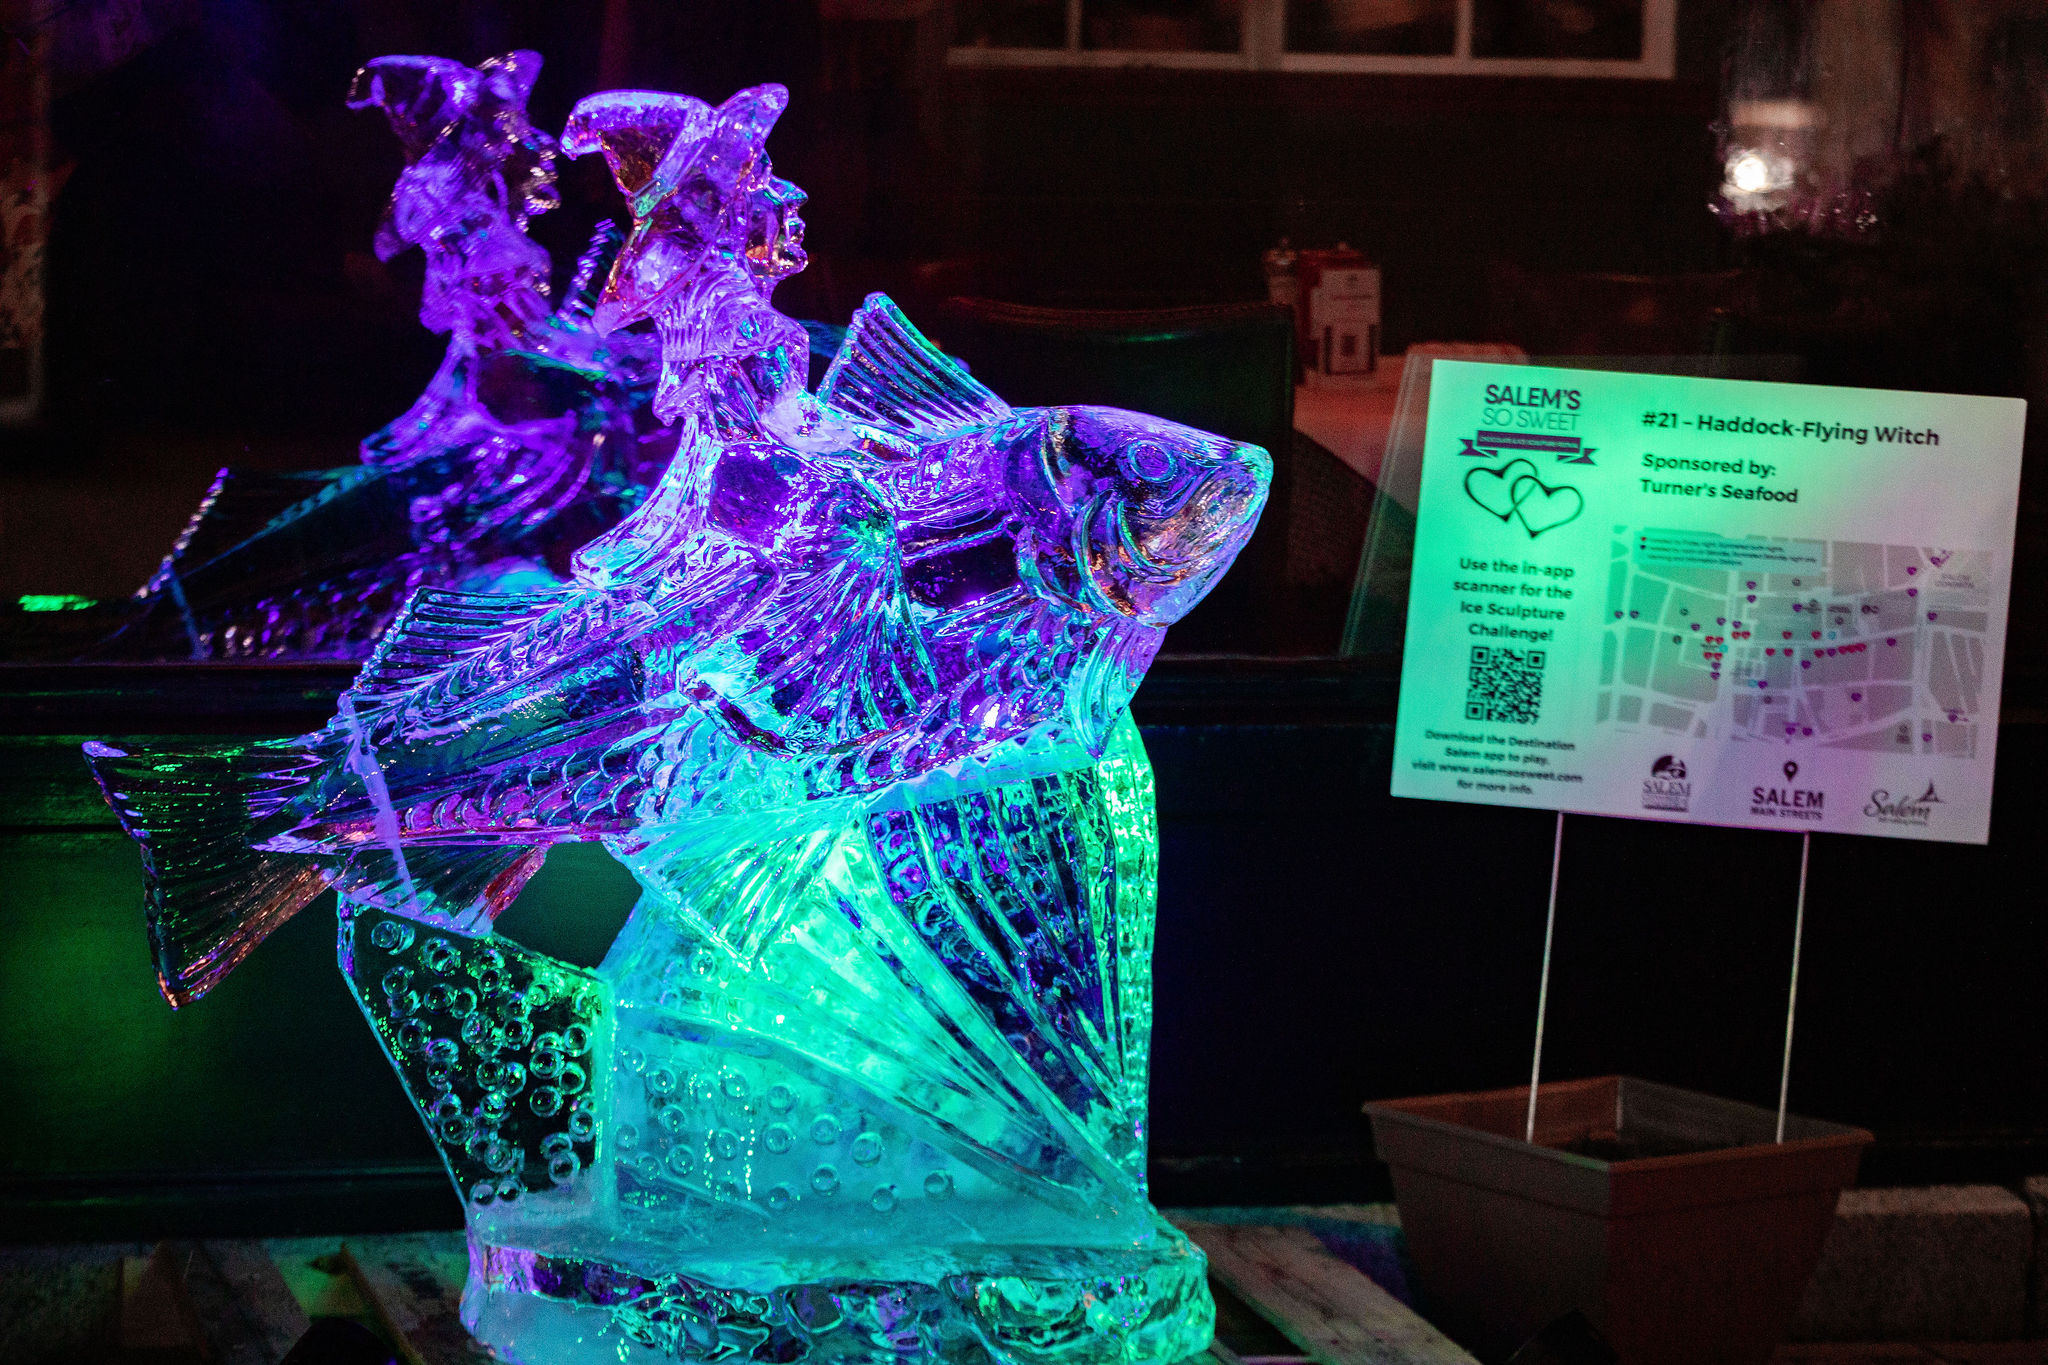 Explore the stunning ice sculptures at the 22nd annual Salem's So Sweet Festival bar, a must-see event for art lovers and festive souls.